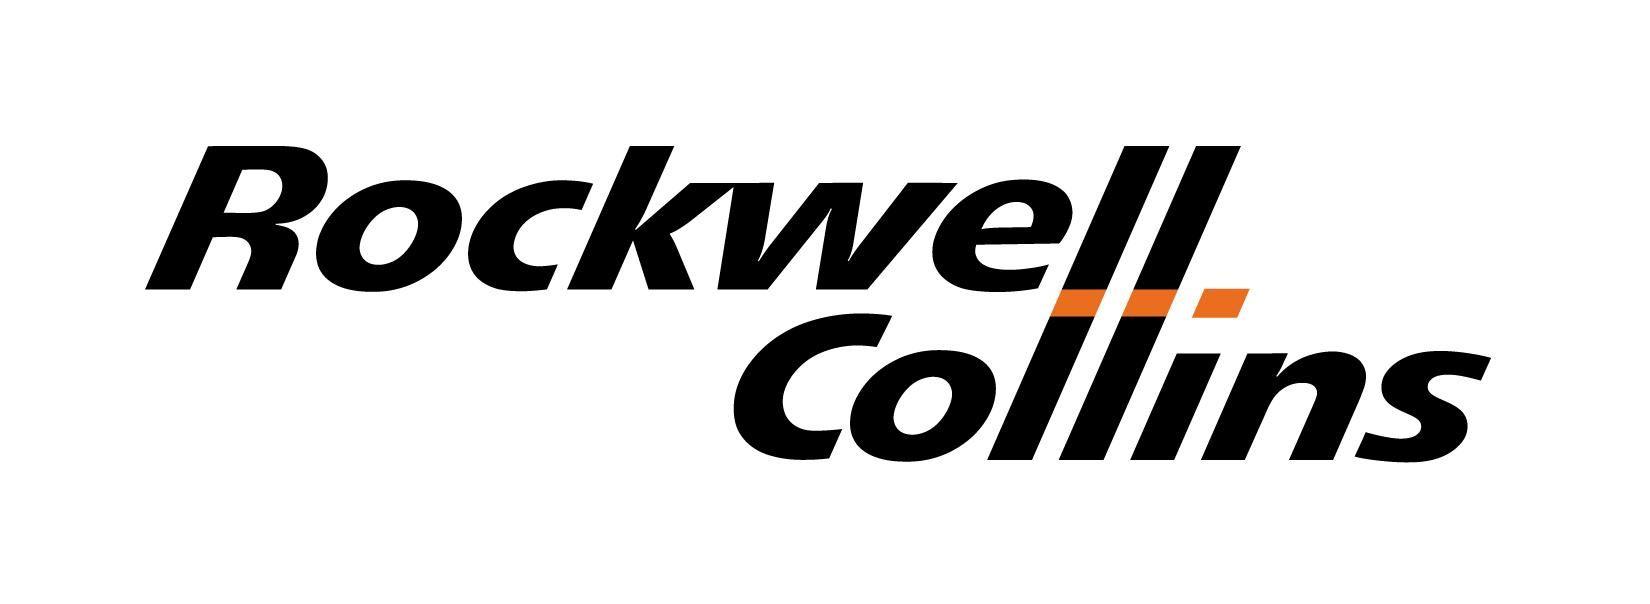 Collins Logo - Rockwell Collins Logo Files